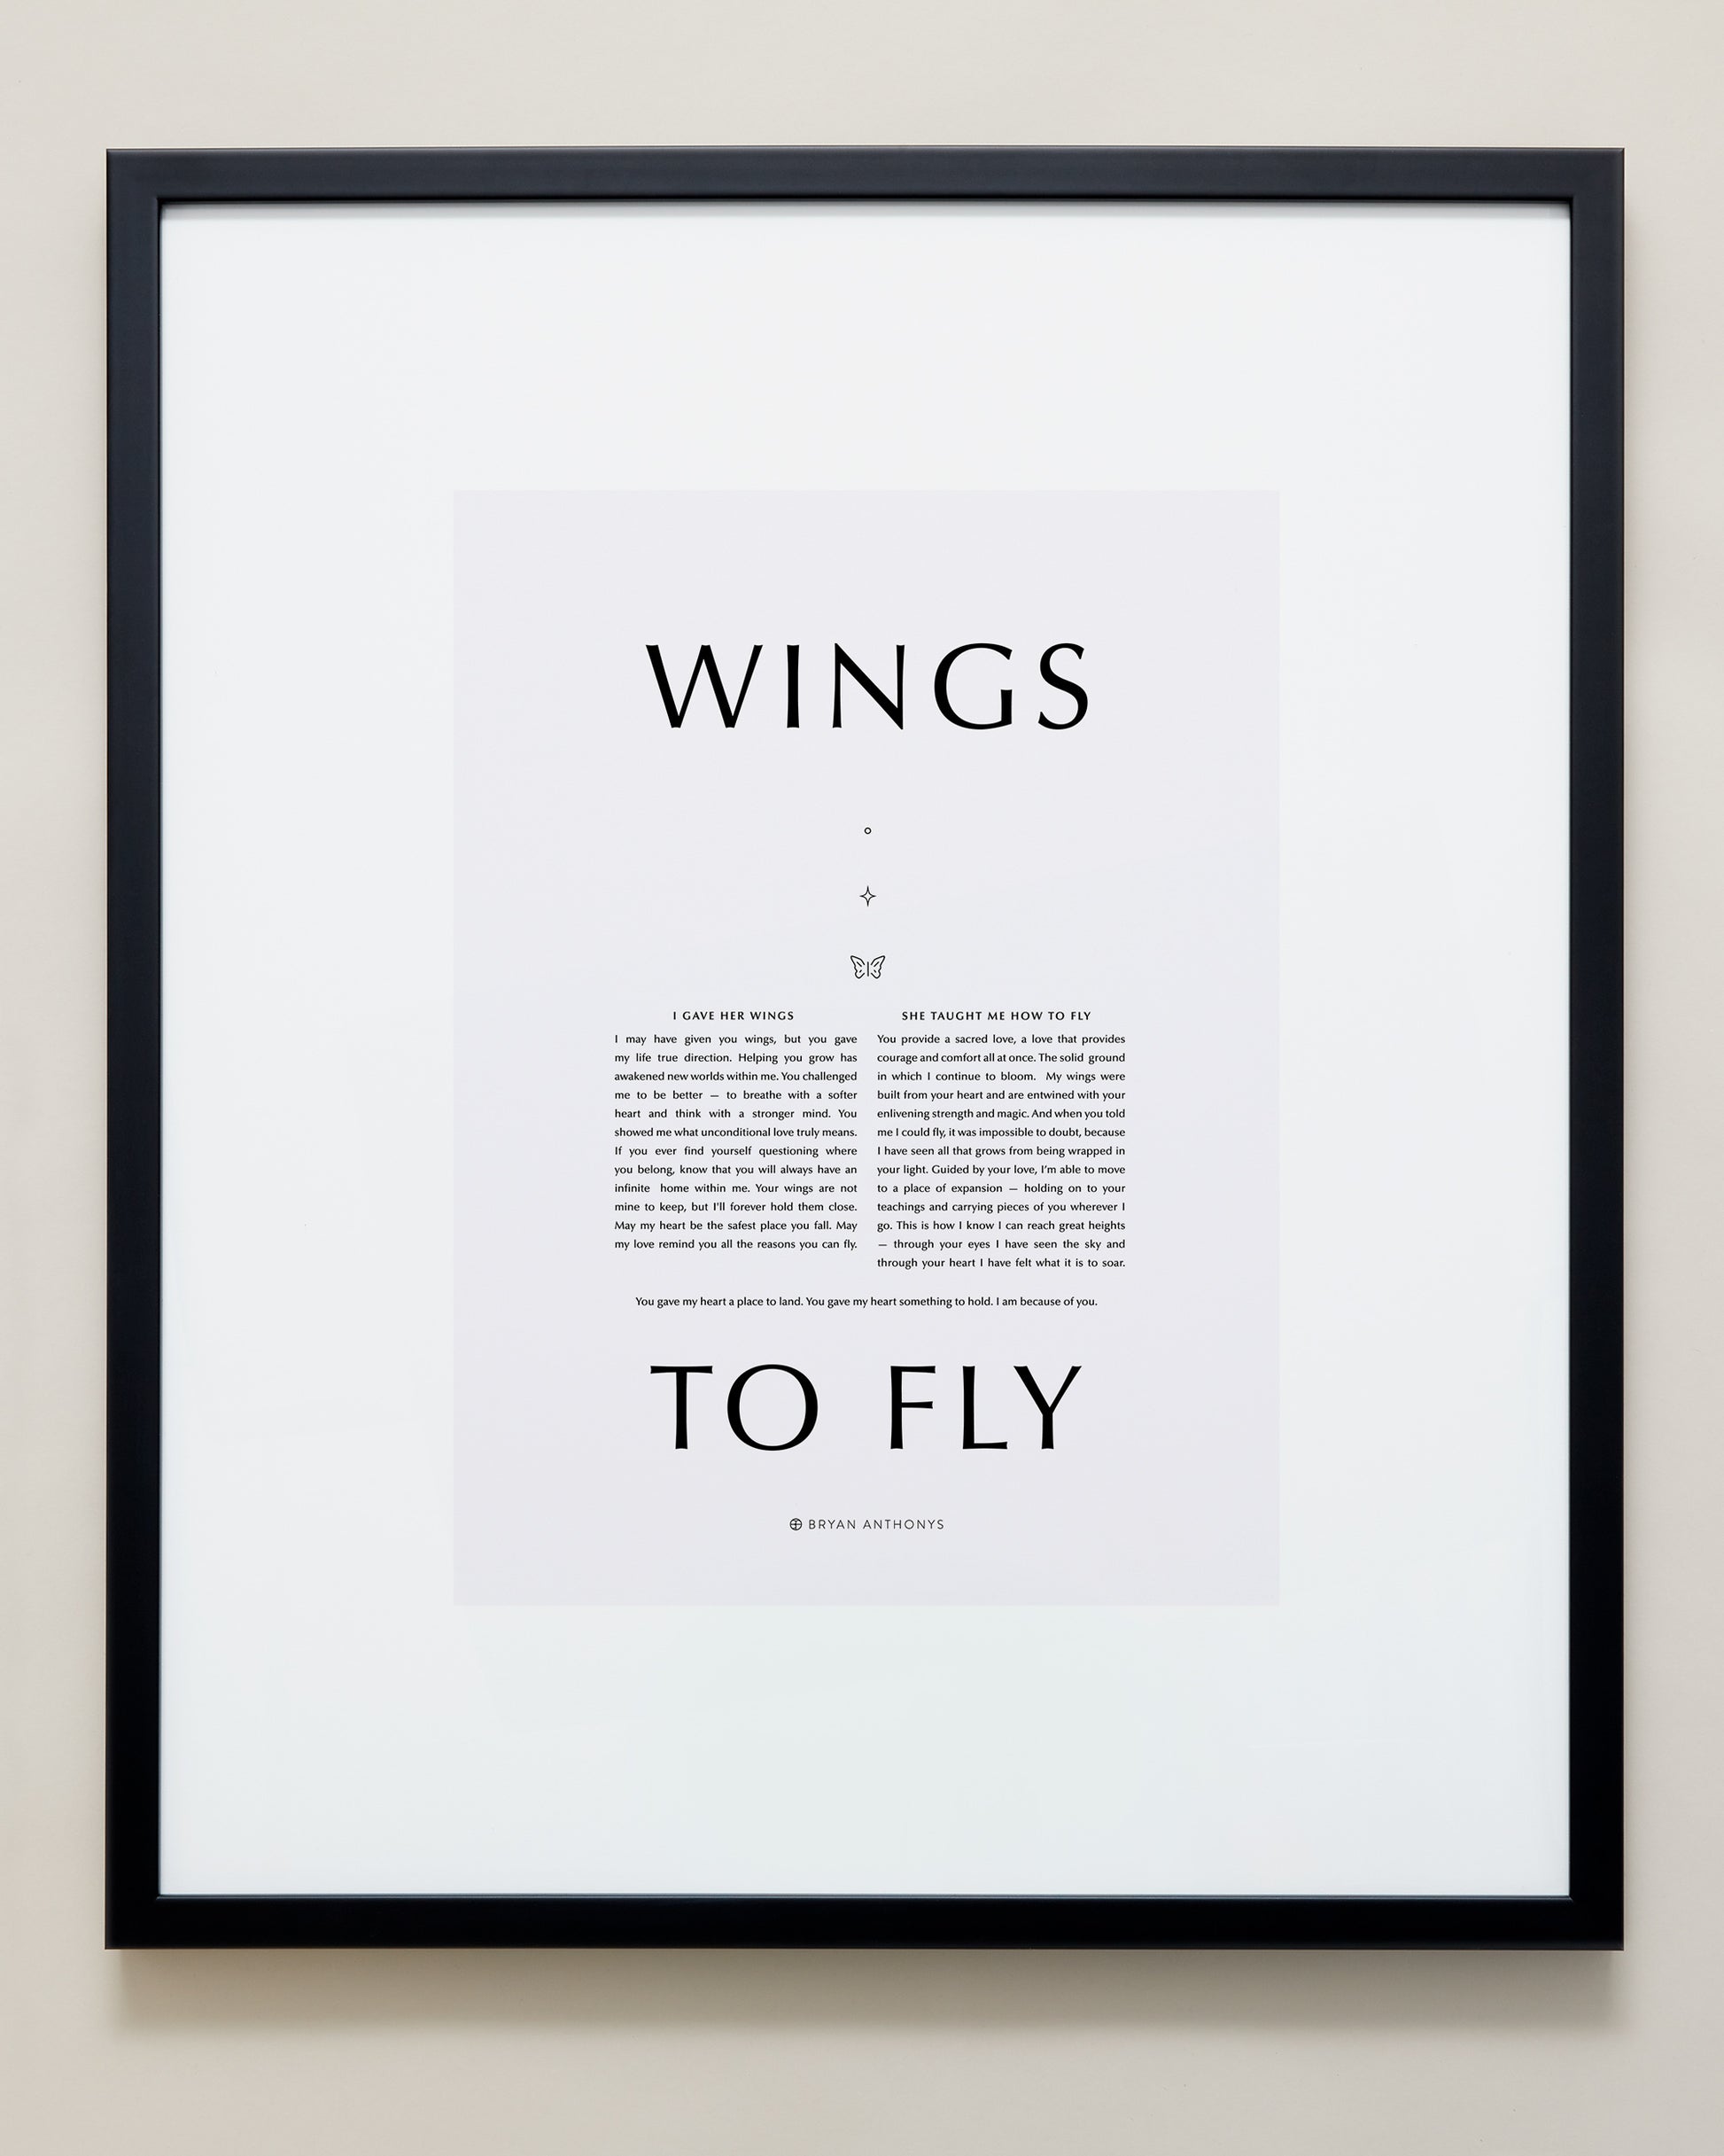 Bryan Anthonys Home Decor Wings To Fly Framed Print 20x24 Black Frame with Gray